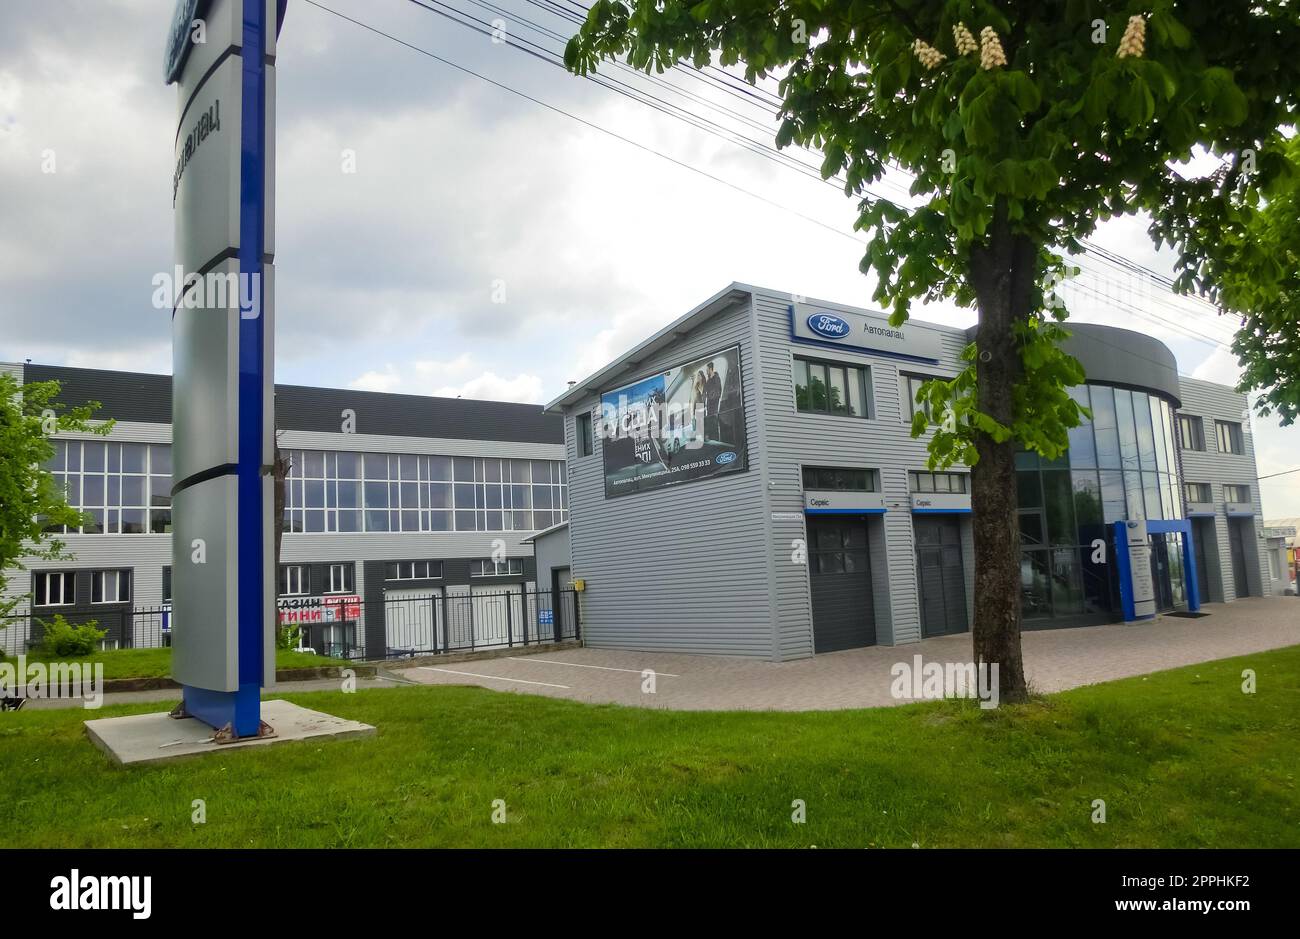 Ford store at Ternopol, Ukraine. The Ford Motor Company is an American multinational automaker founded by Henry Ford in 1903. Stock Photo